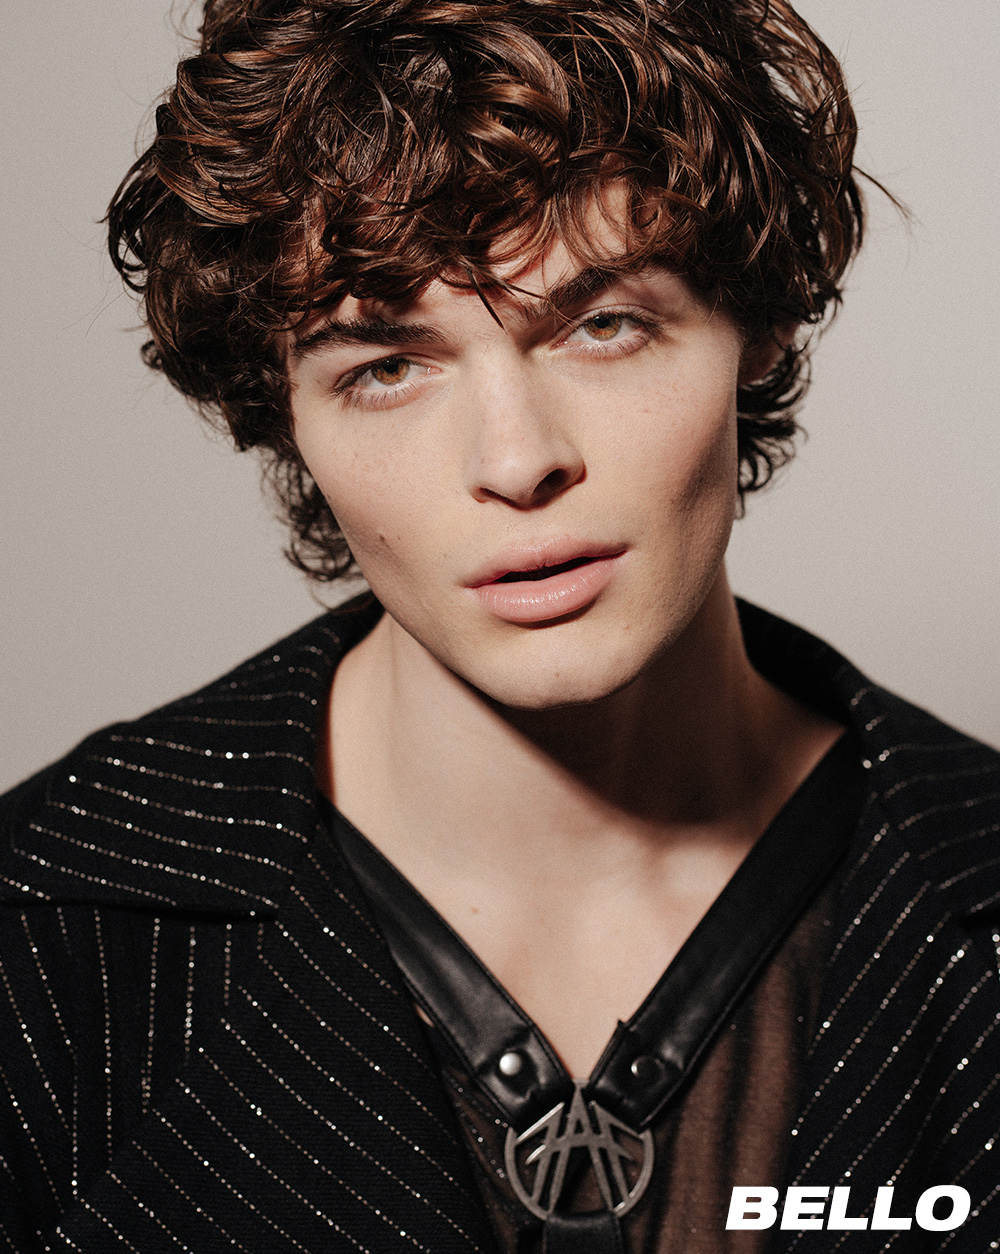 BELLO Young Hollywood | Tyler Lawrence Gray – BELLO Mag